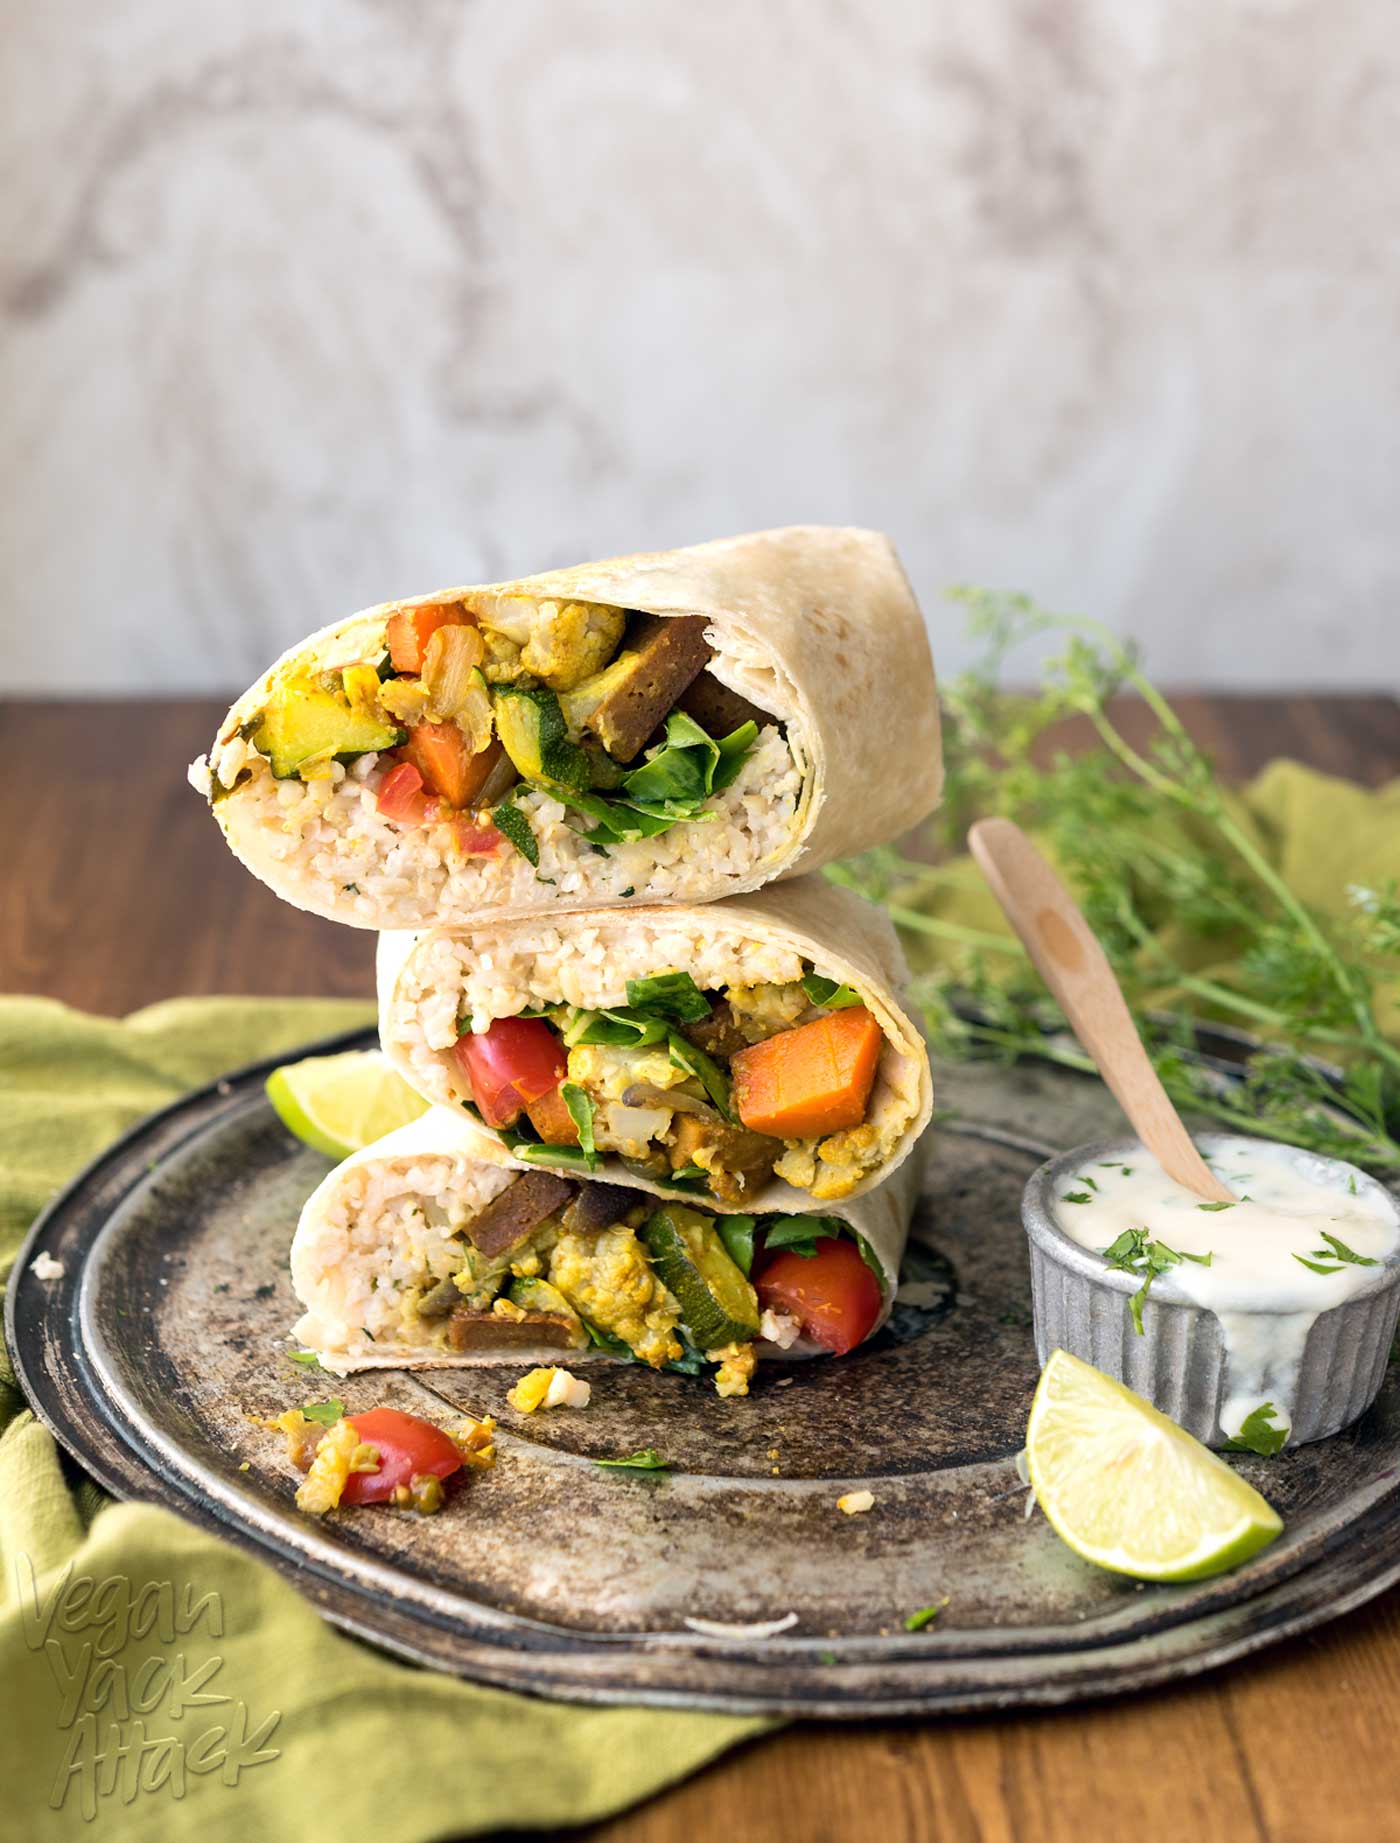 This Curry Cauliflower Burrito is easy-to-make, filled with awesome flavors, and can even be frozen for weekly lunches! Made with delicious Sweet Earth Foods’ Curry Satay. Mmm.. #vegan #nutfree #veganyackattack